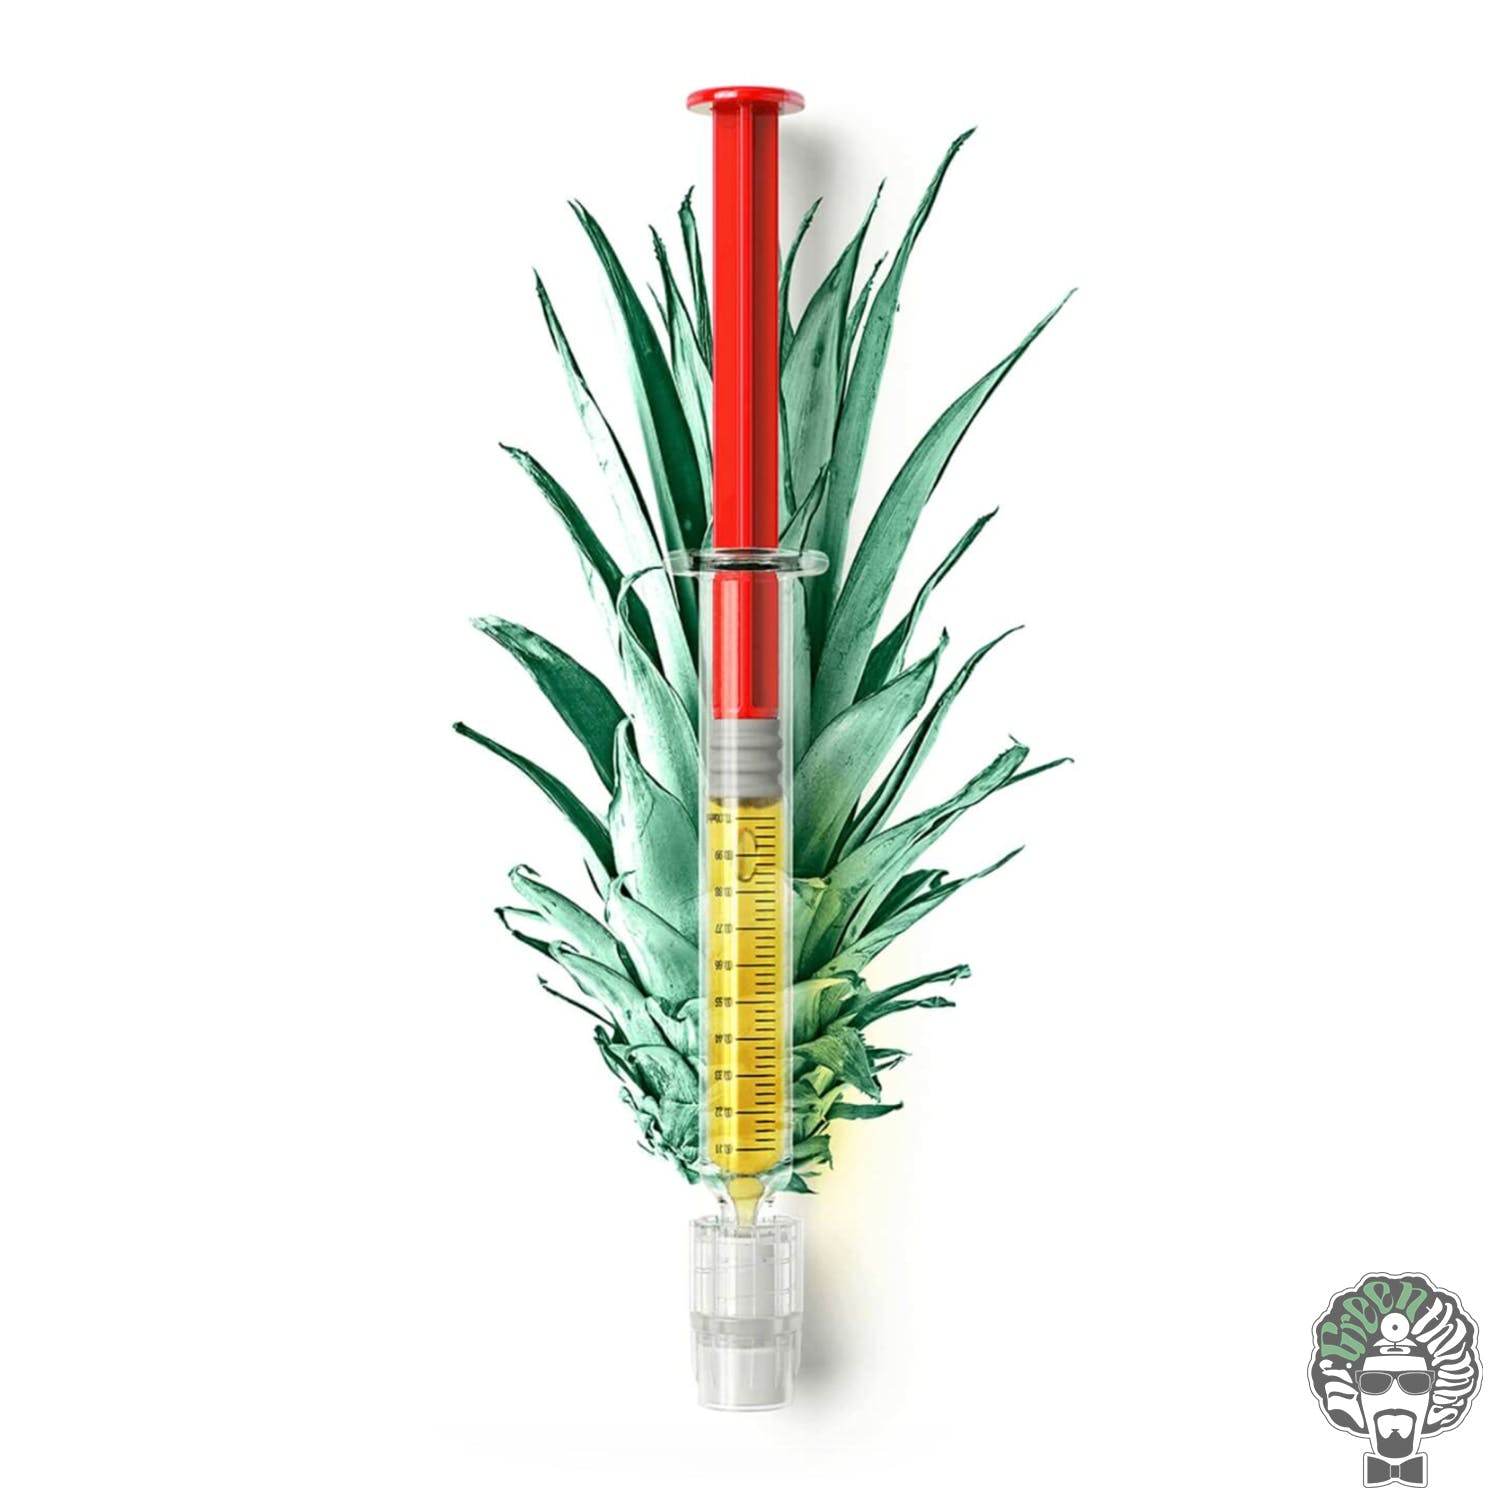 Pineapple Express .8 Refillable Cartrige Tincture By Bloom